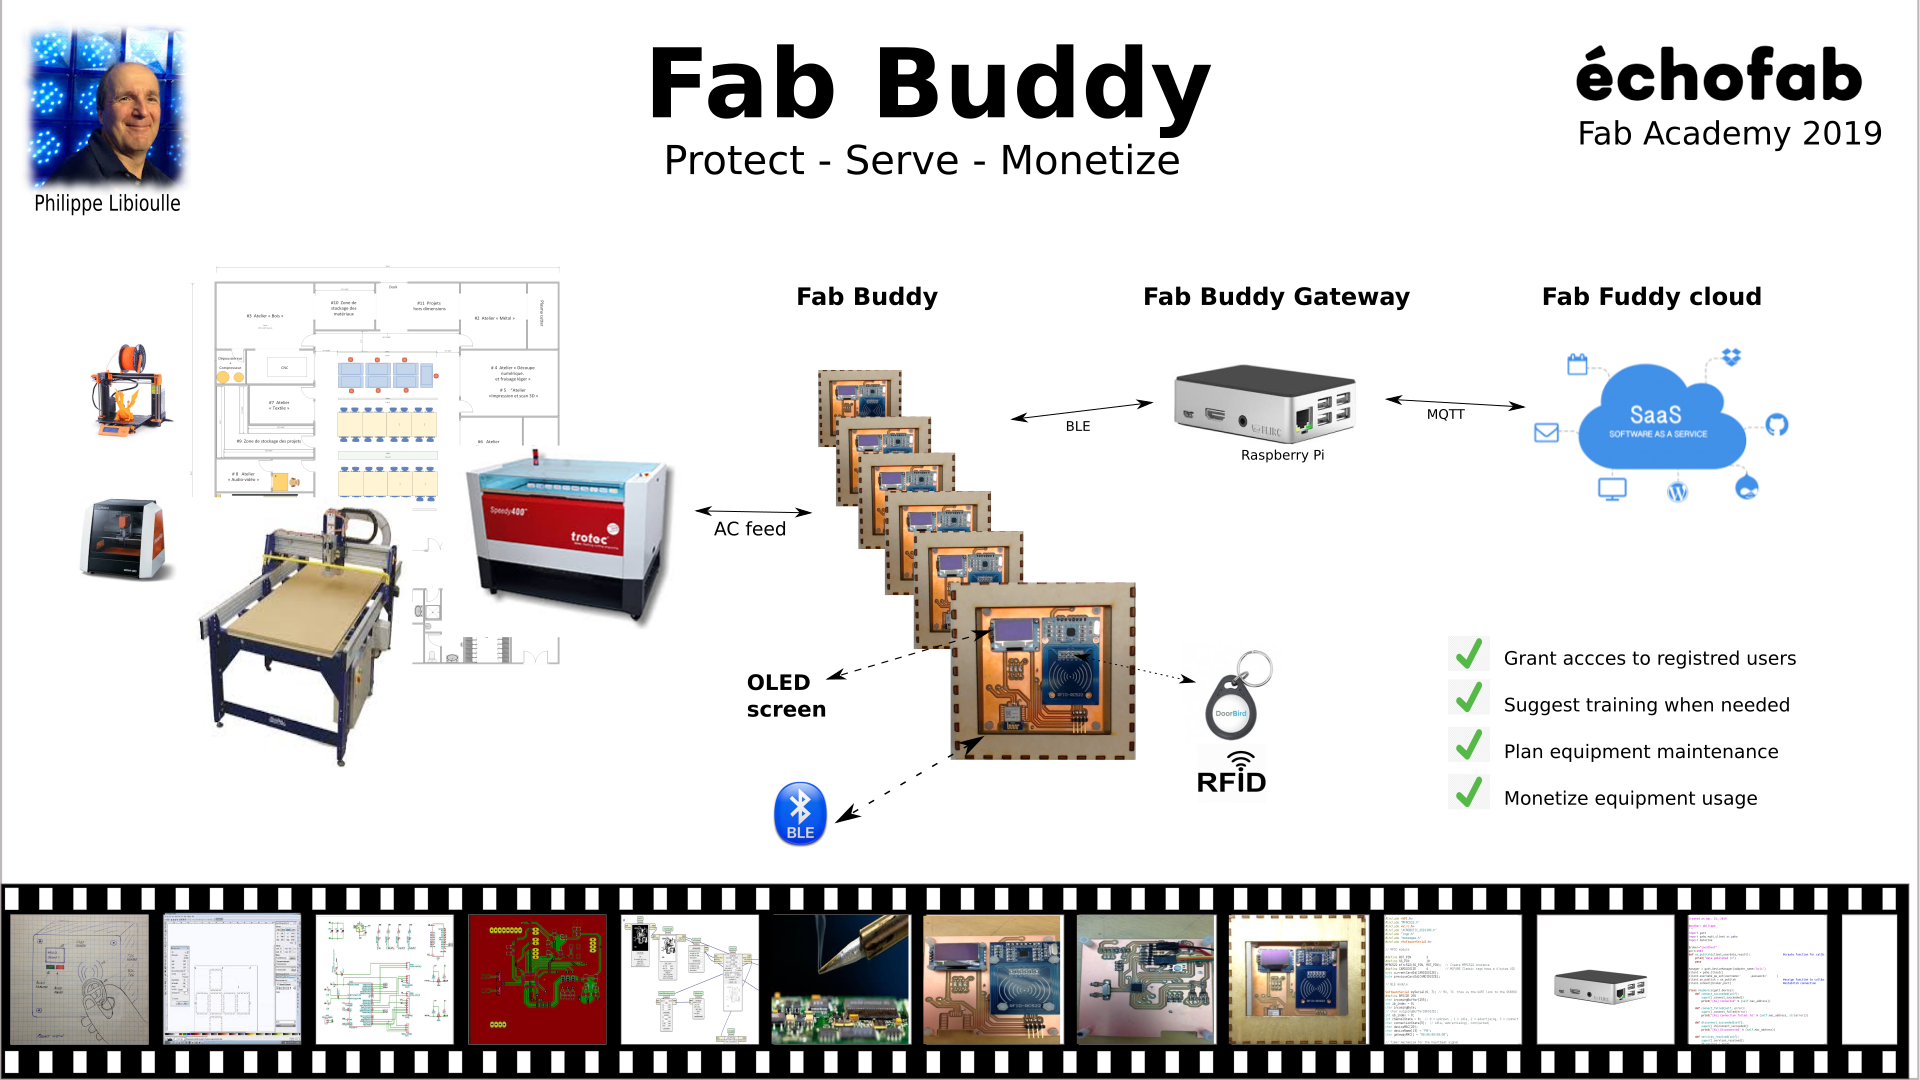 Fab Buddy, by Philippe Libioulle